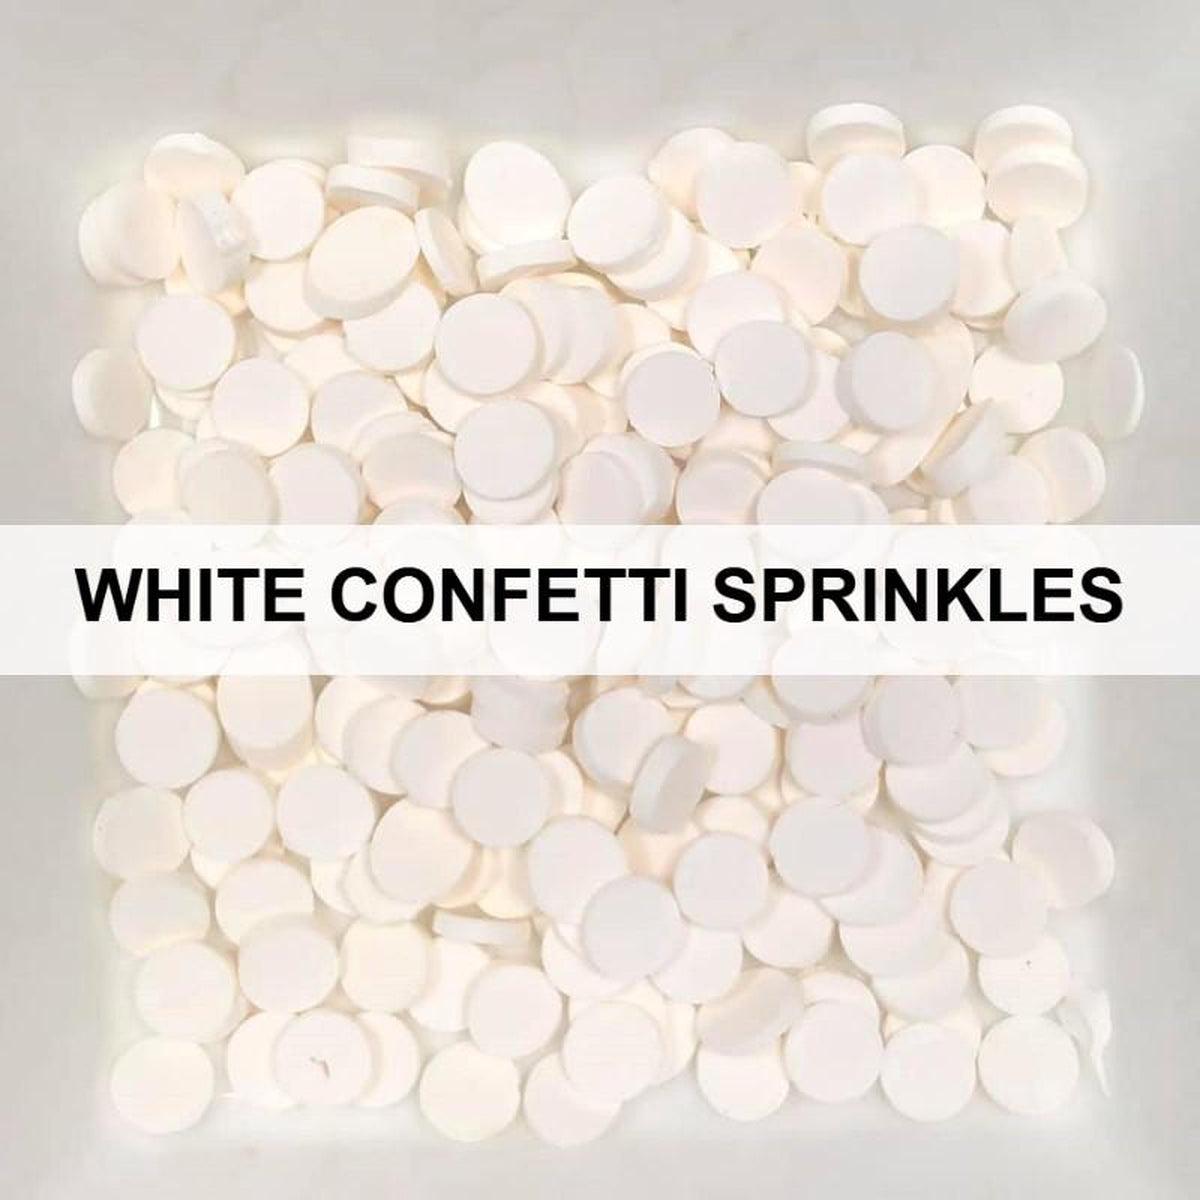 White Confetti Sprinkles by Kat Scrappiness - Kat Scrappiness